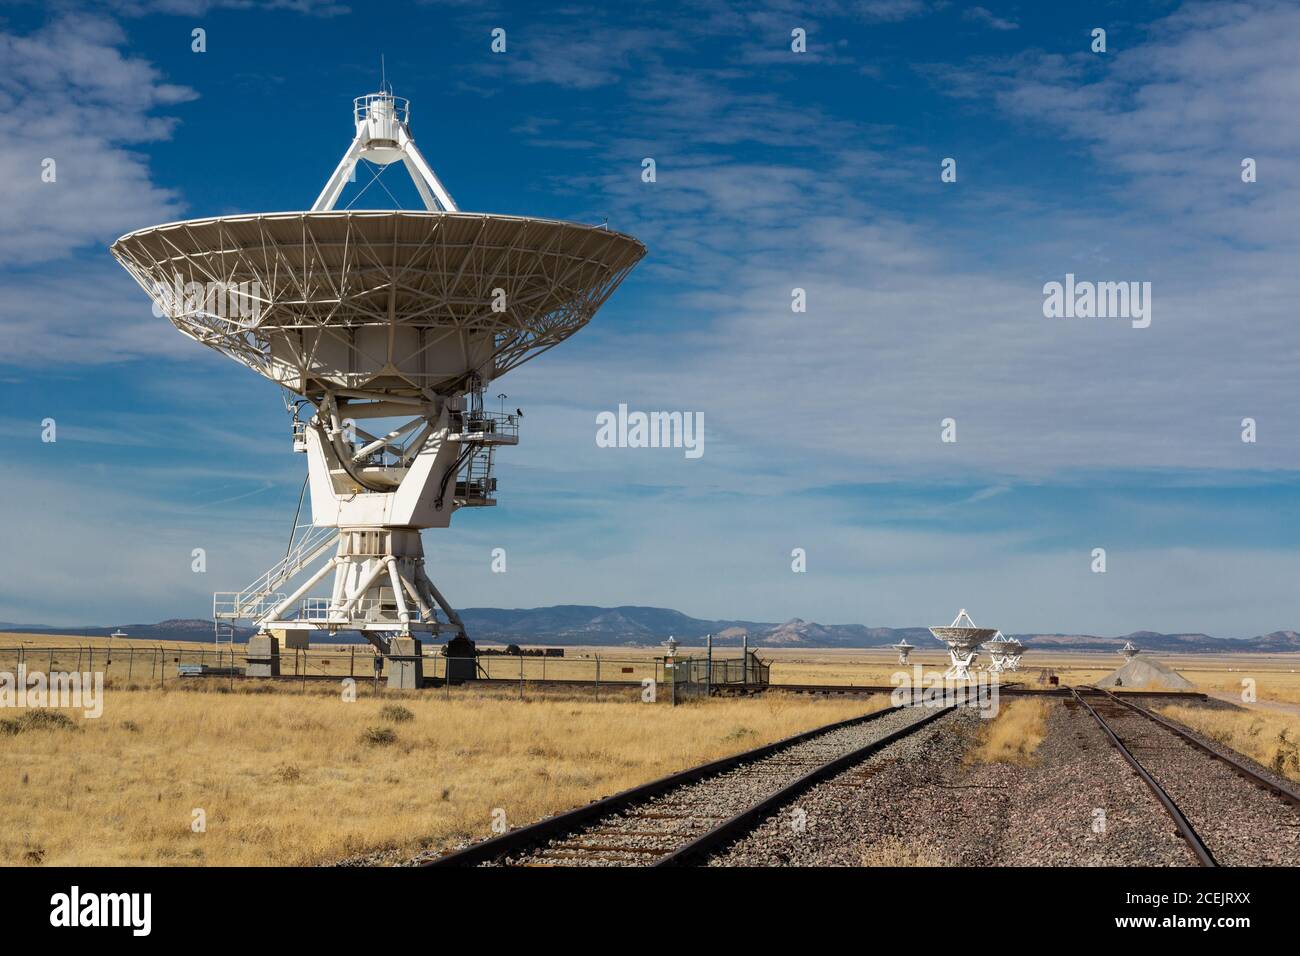 Antenna dishes of the Karl G. Jansky Very Large Array radiotelescope astronomy observatory near Magdalena, New Mexico in the United States.  The Very Stock Photo